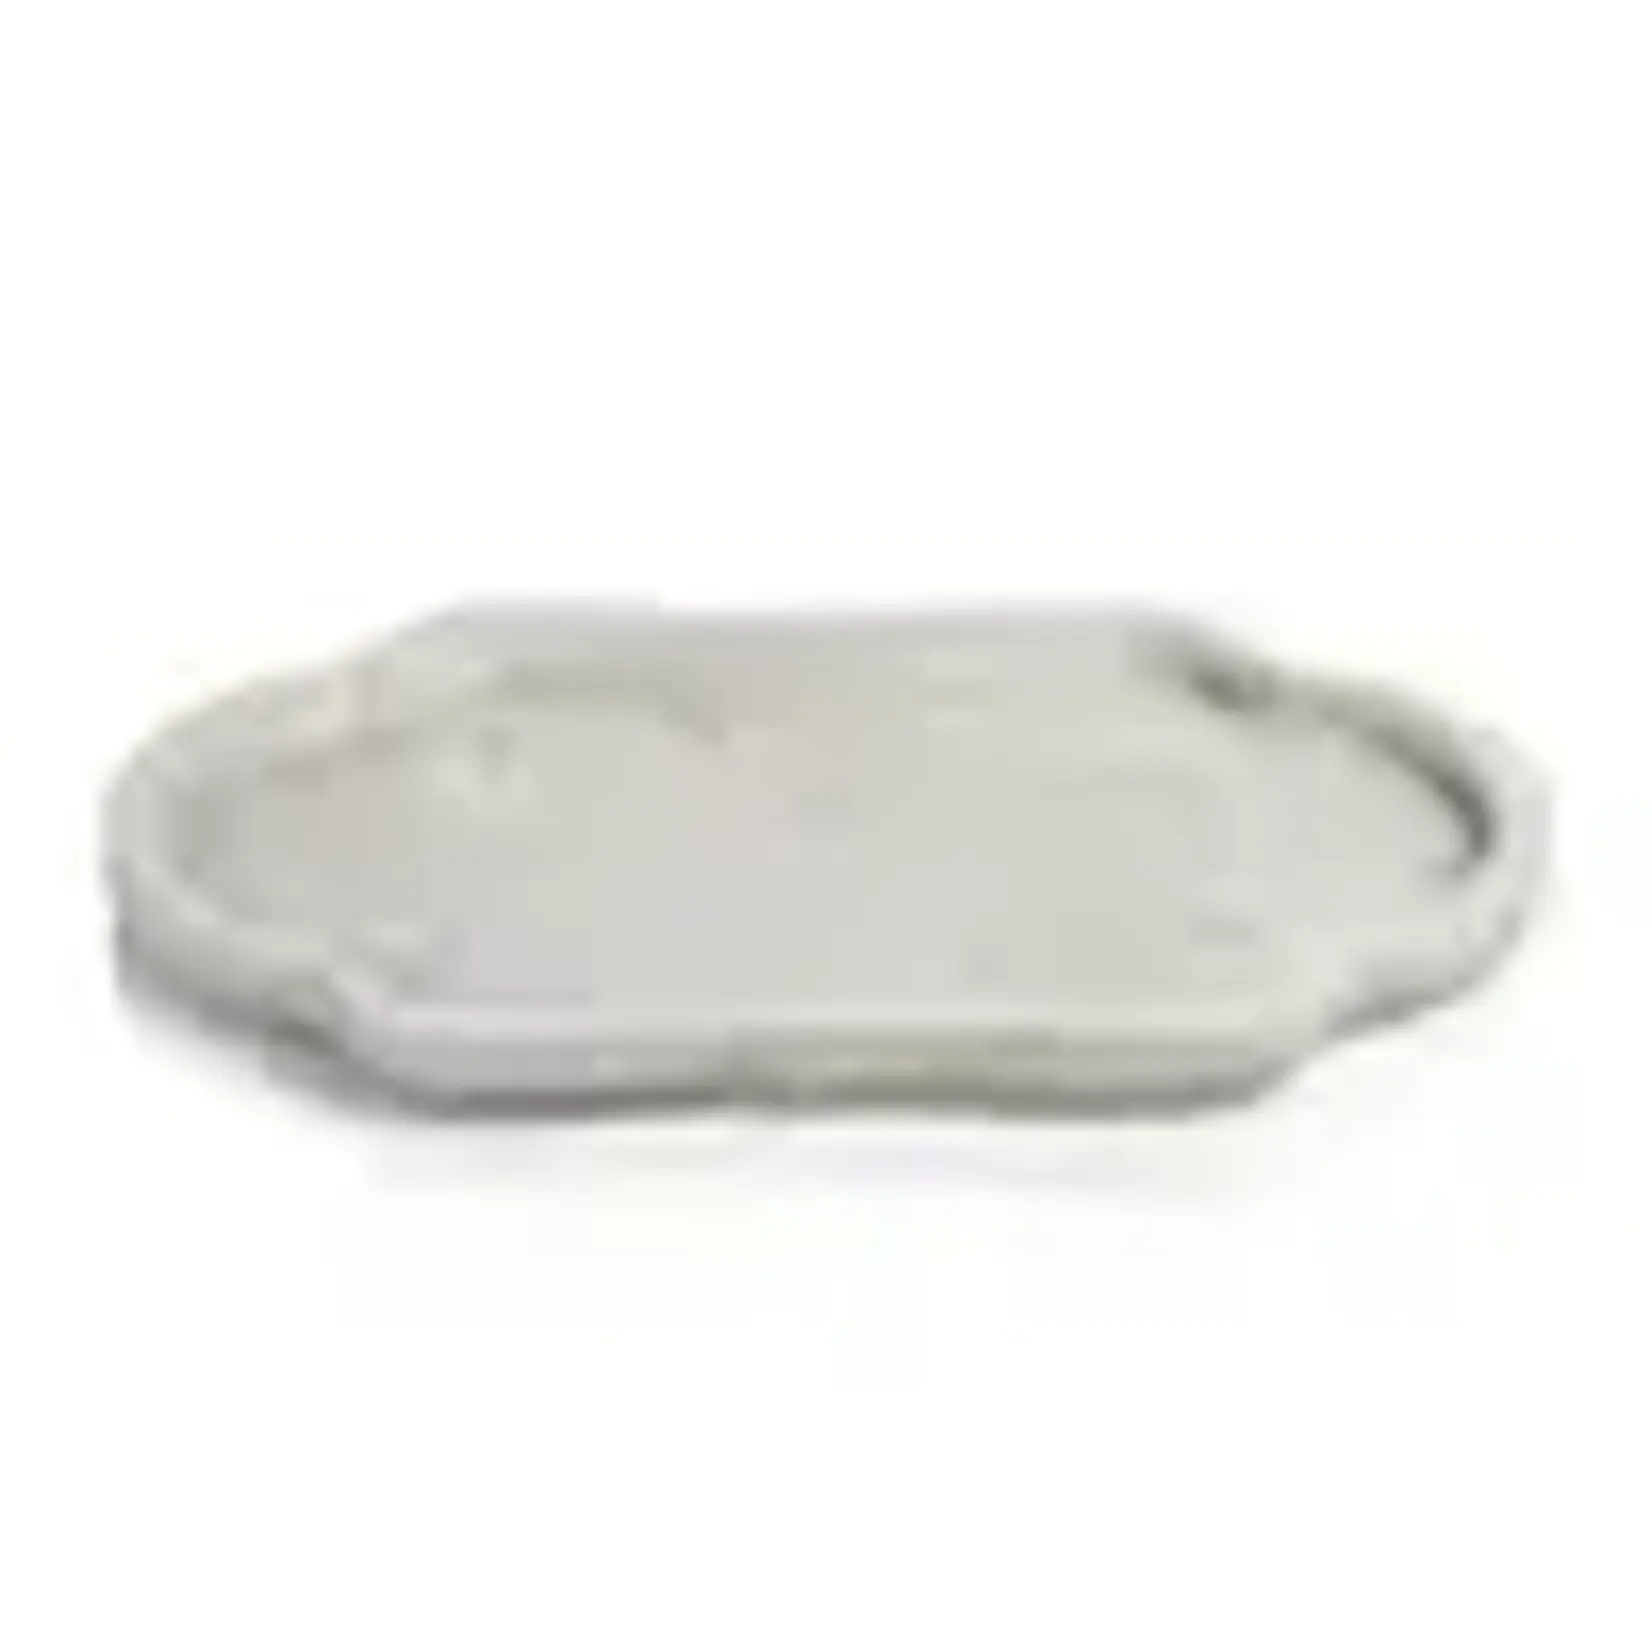 Zodax Pietre White Marble Tray - Large